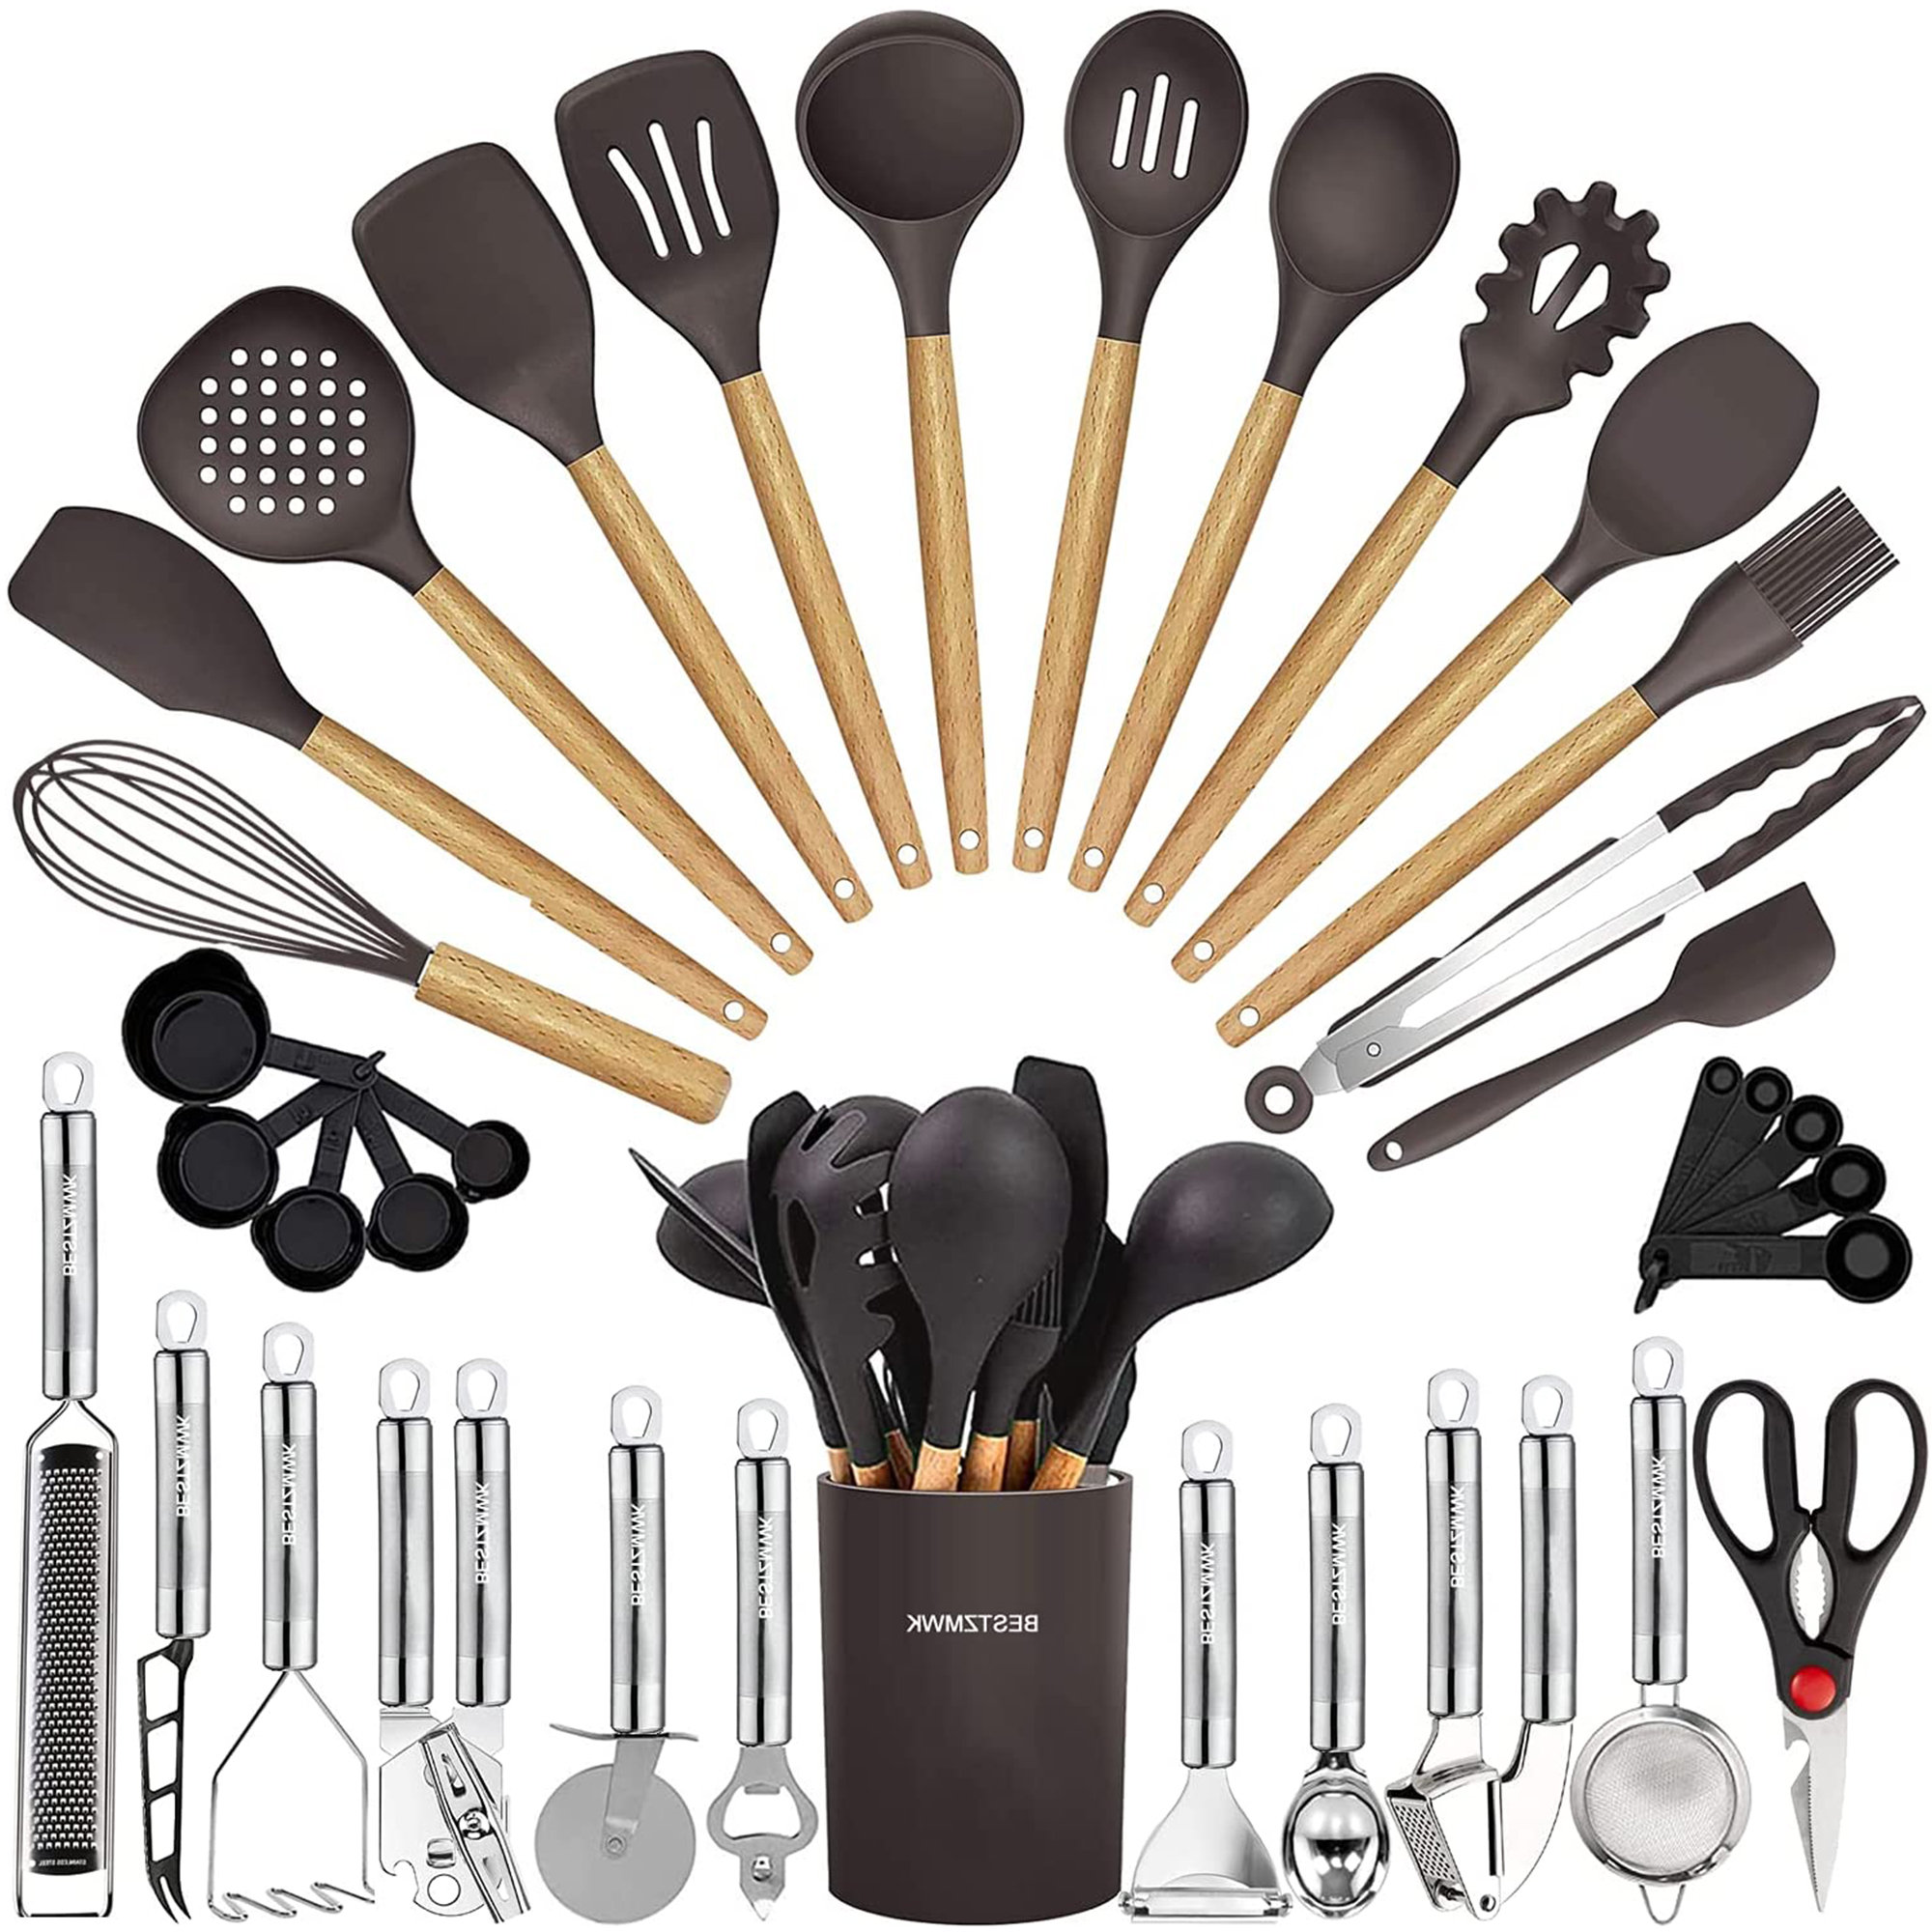  Kitchen Utensils Set,33PC Silicone Kitchen Cooking Utensils Set  - Measuring Cups and Spoons Set with Stainless Steel Handle Kitchen Gadgets  (Grey) : Home & Kitchen